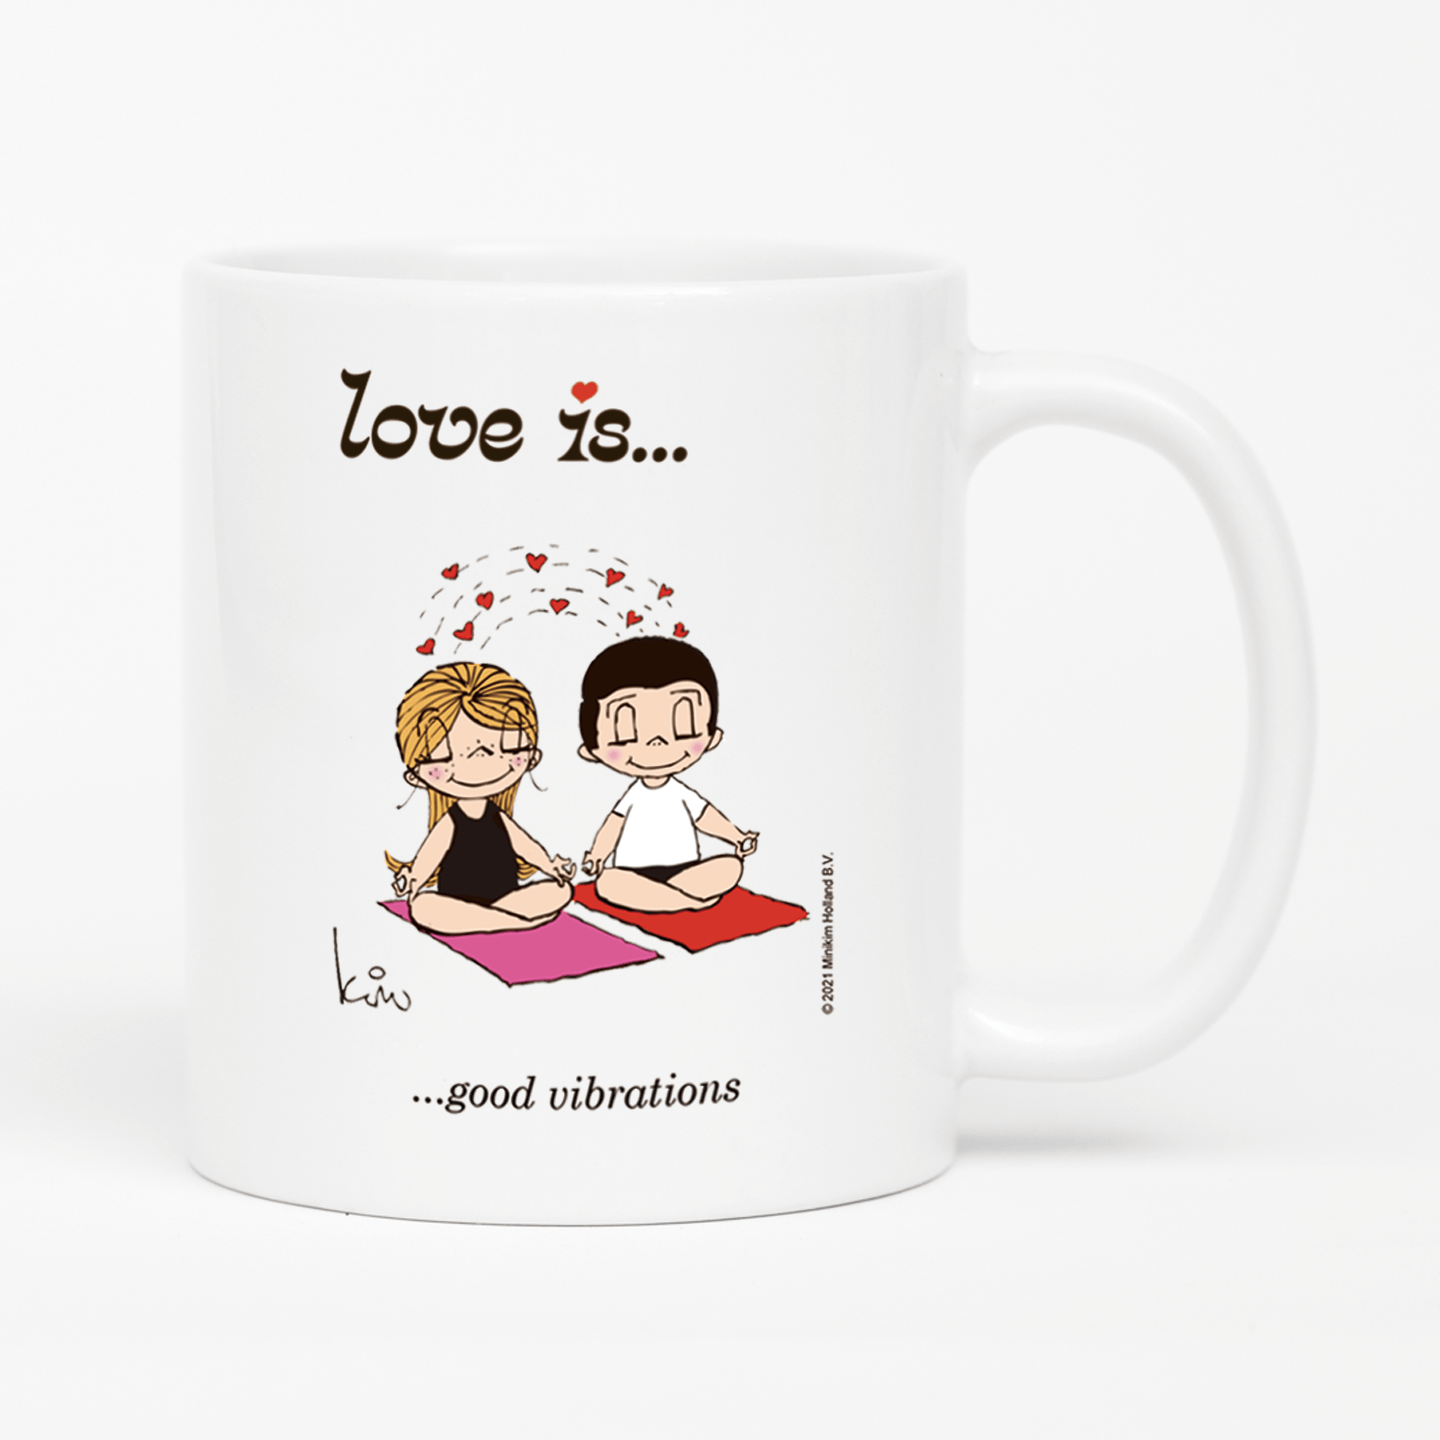 Front view: Love is... good vibrations  personalized ceramic mug by Kim Casali. 